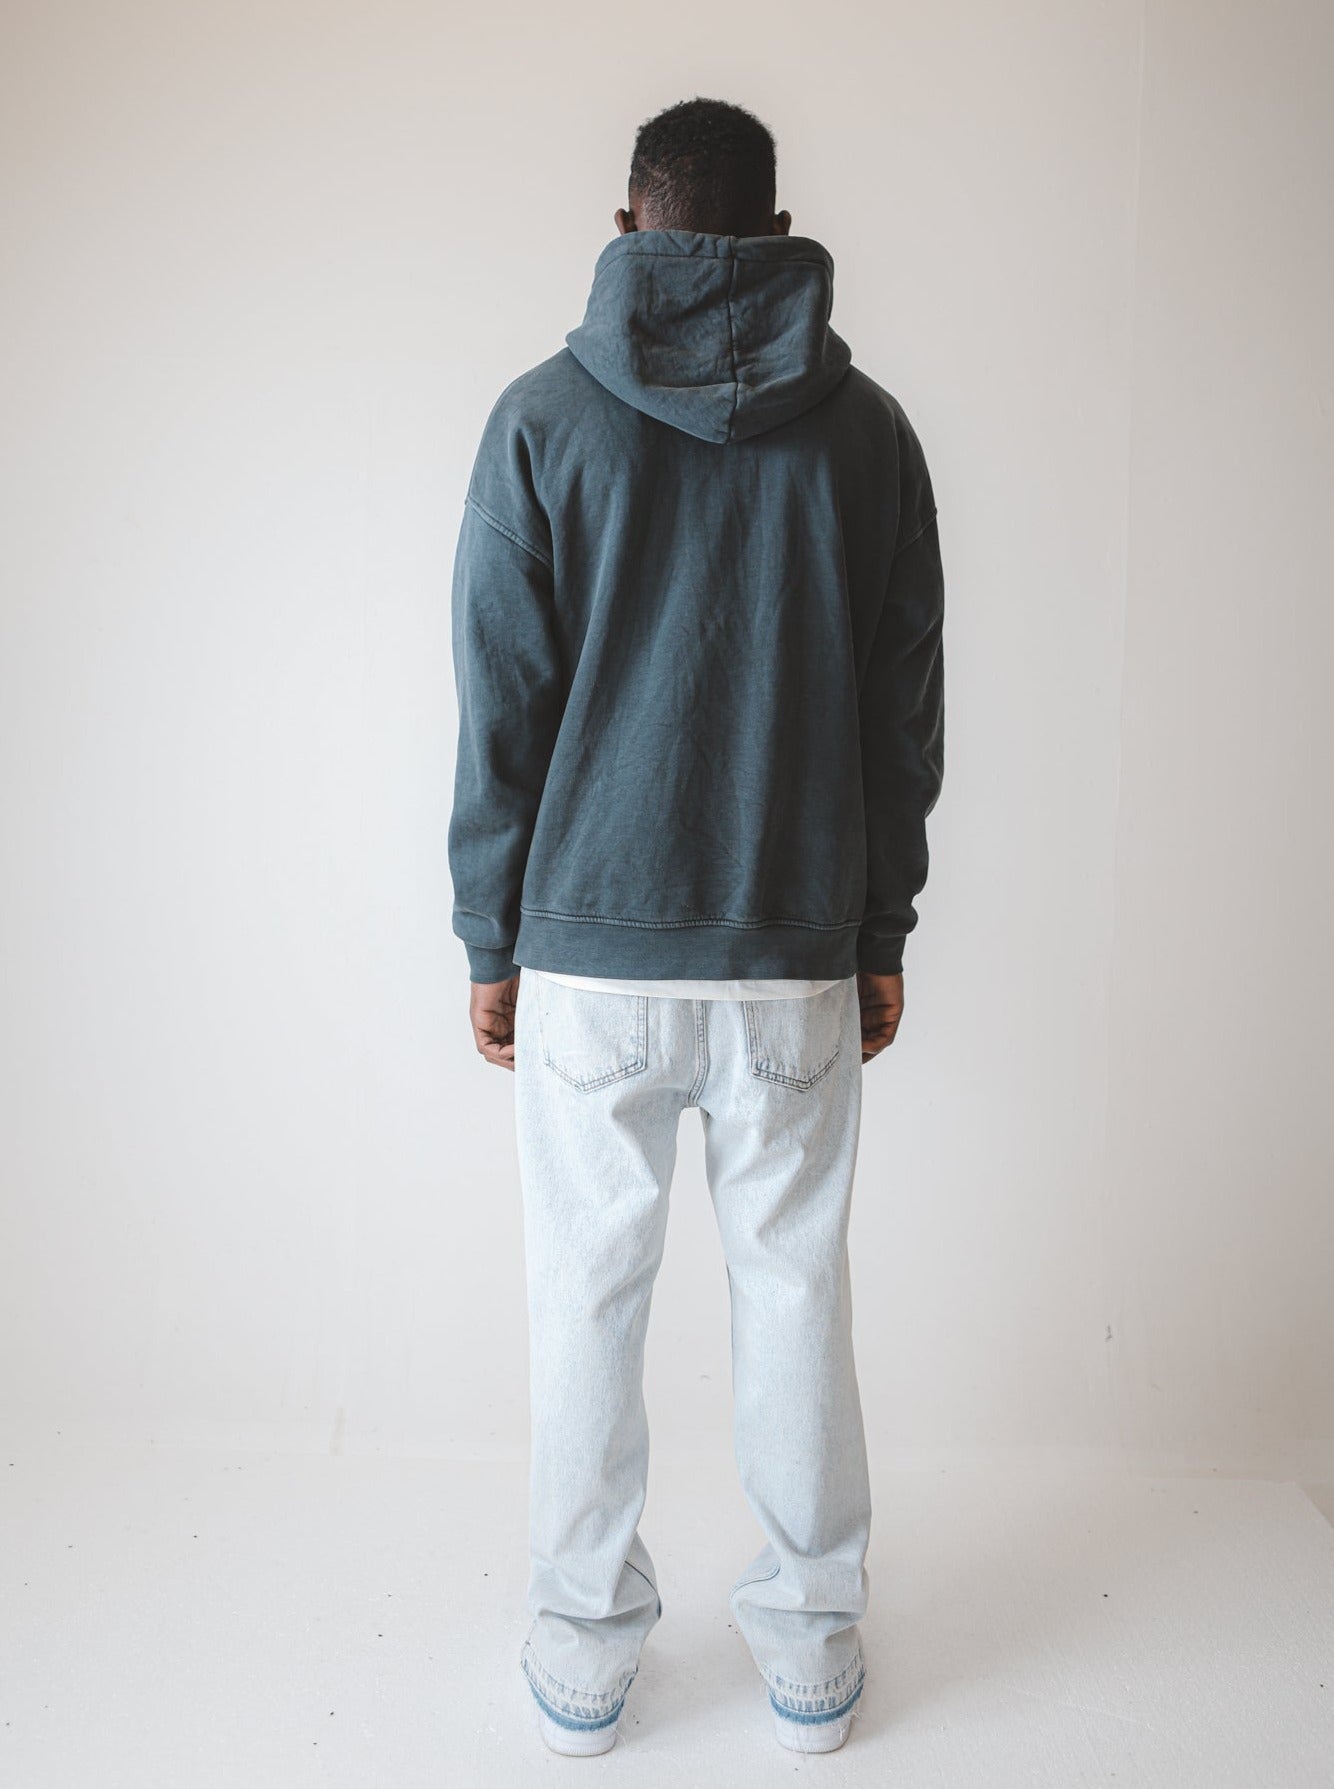 Pre-Washed Heavyweight Oversized Hoodie